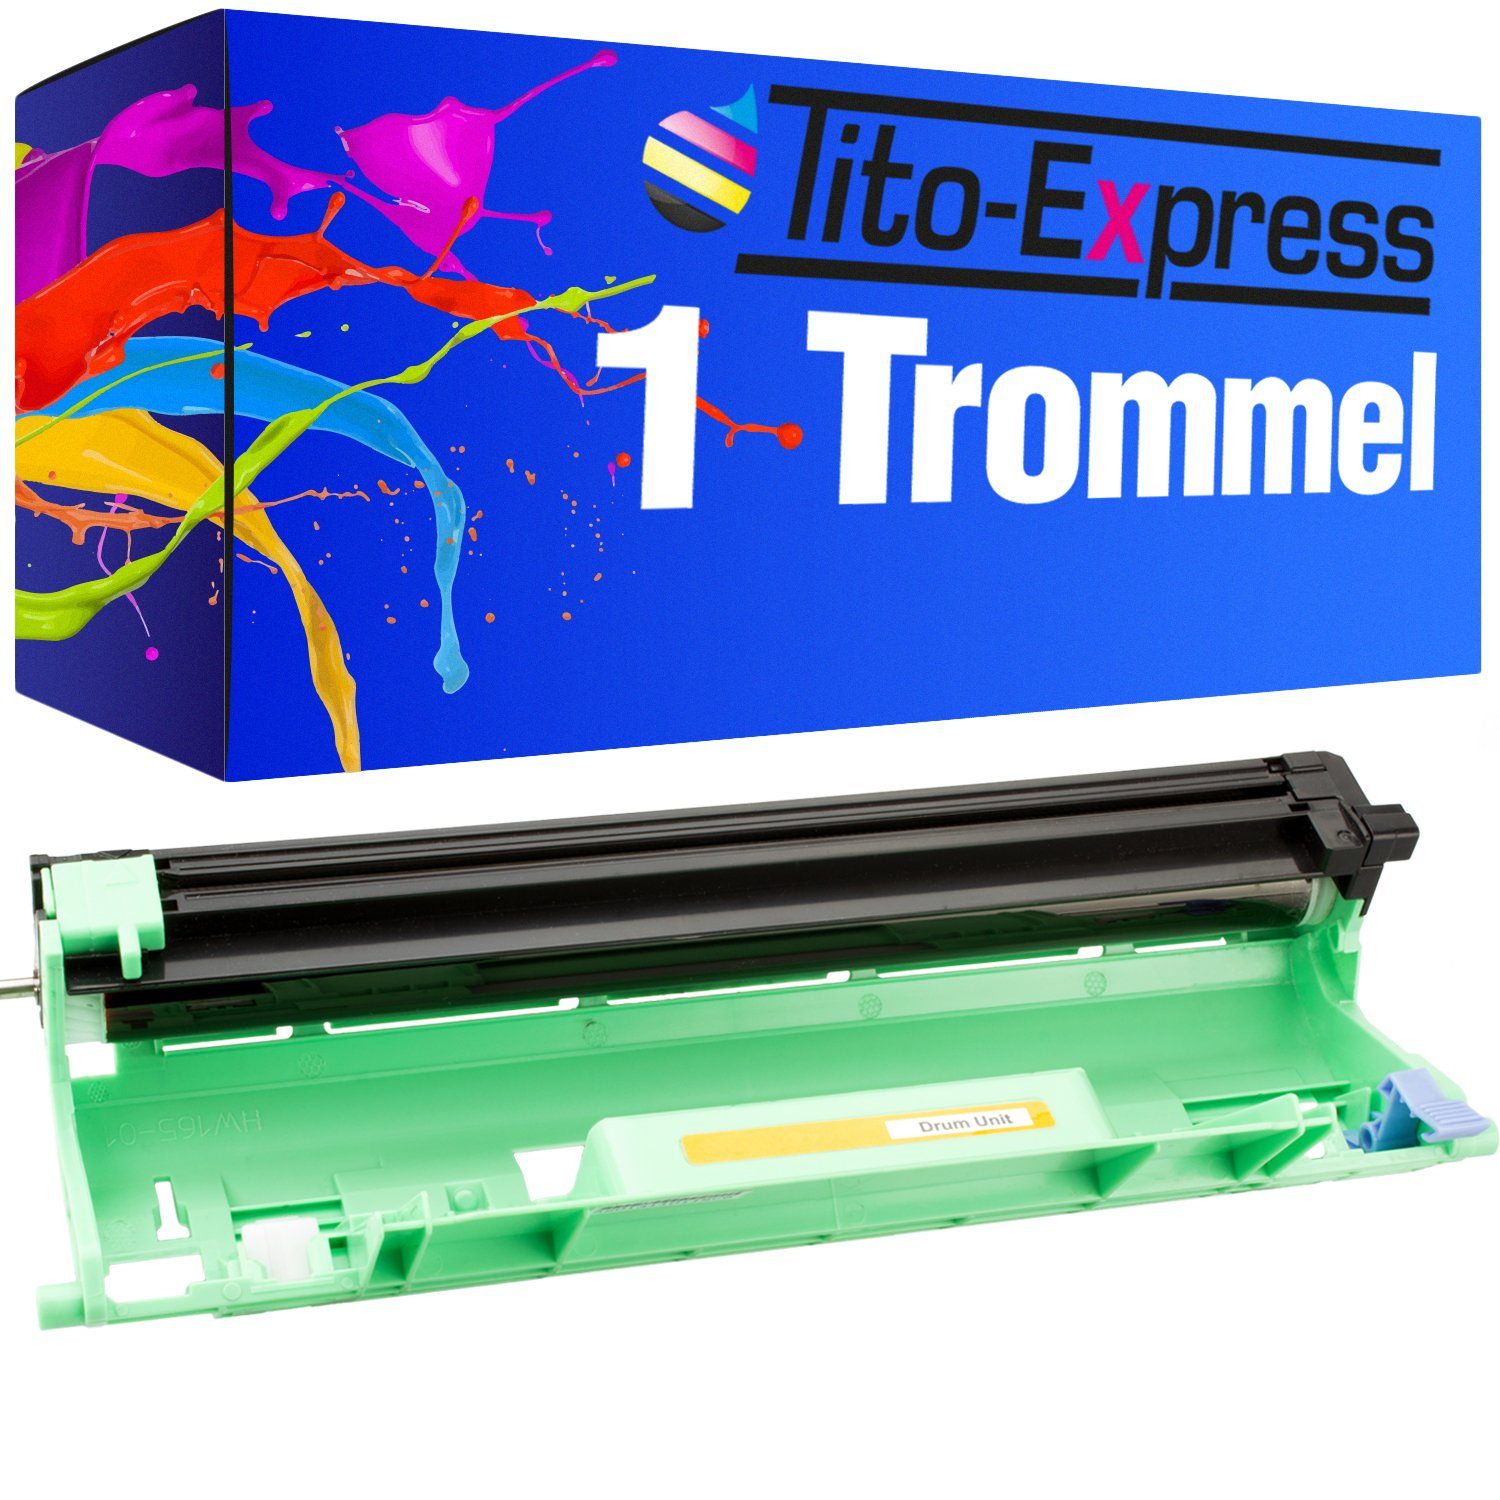 DCP-1512 DCP-1612W DR Tito-Express DCP-1510 1050 MFC-1810 DCP-1610W Trommel Brother HL-1110 Trommel), (1x DR-1050 BrotherDR1050, ersetzt Tonerpatrone Brother für MFC-1910W